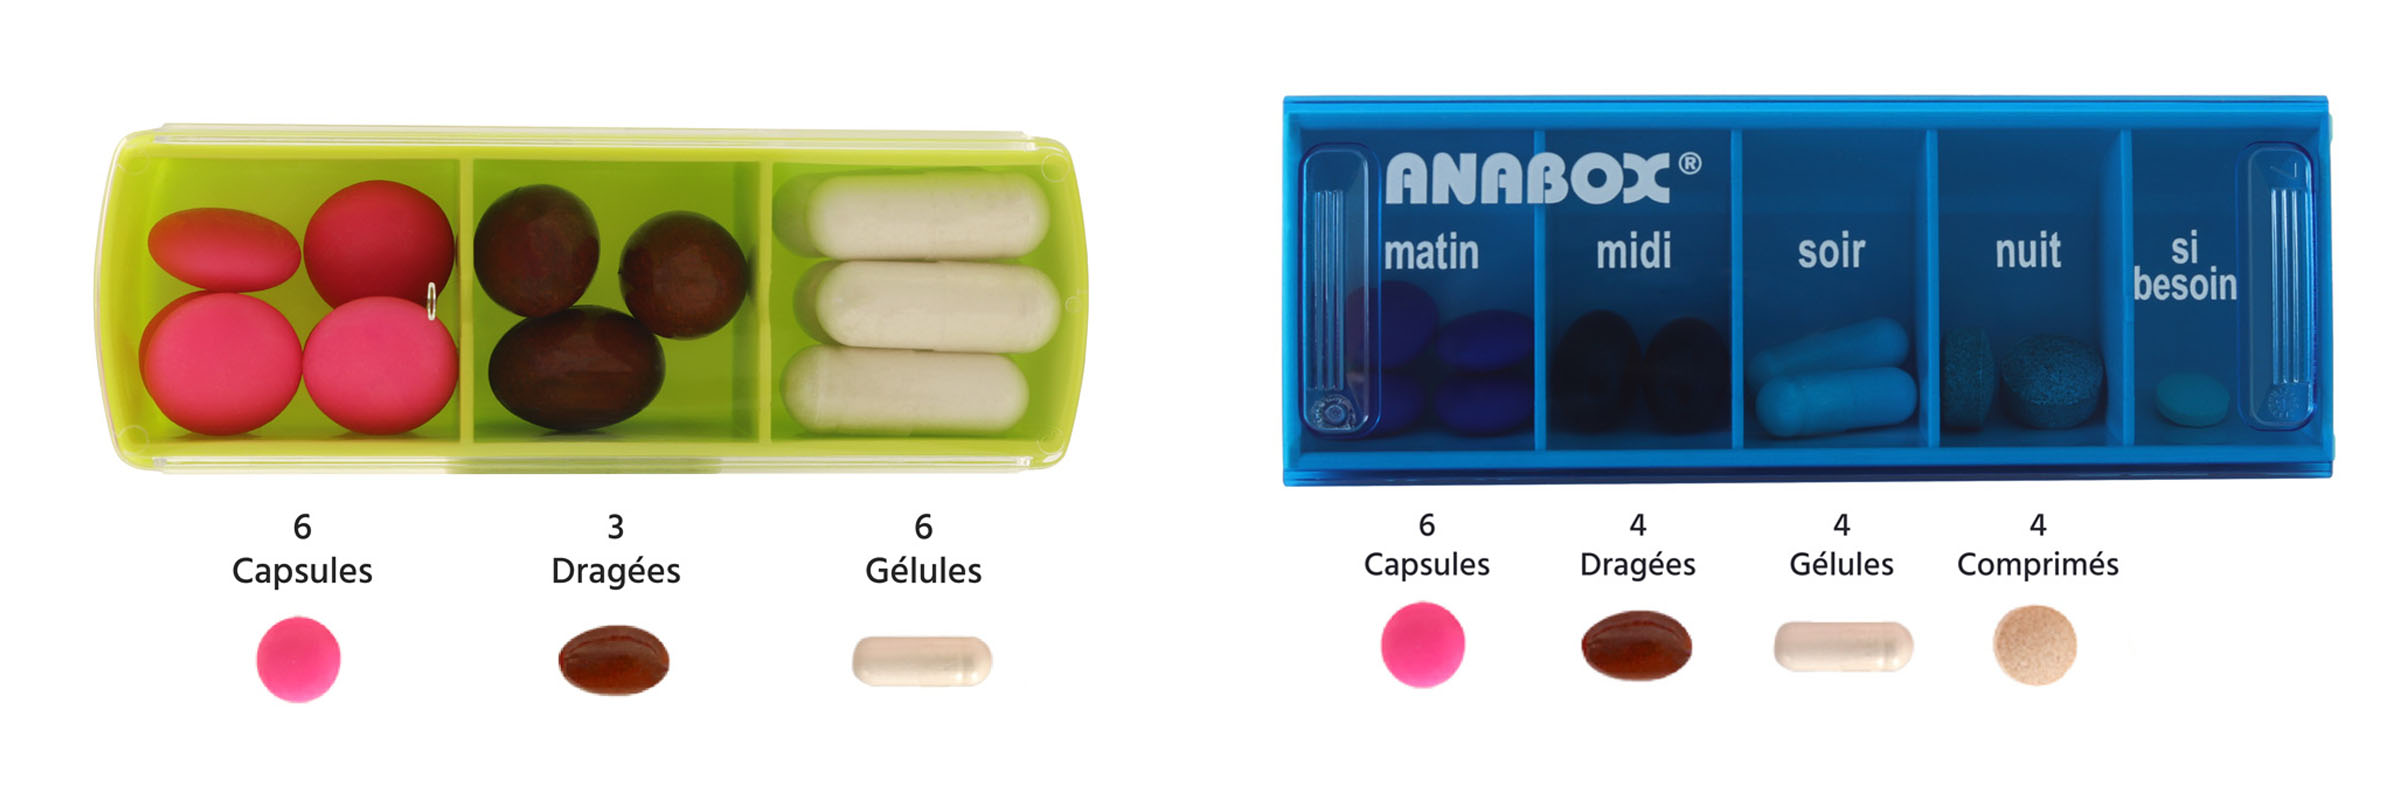 Comparatif piluliers journaliers Anabox